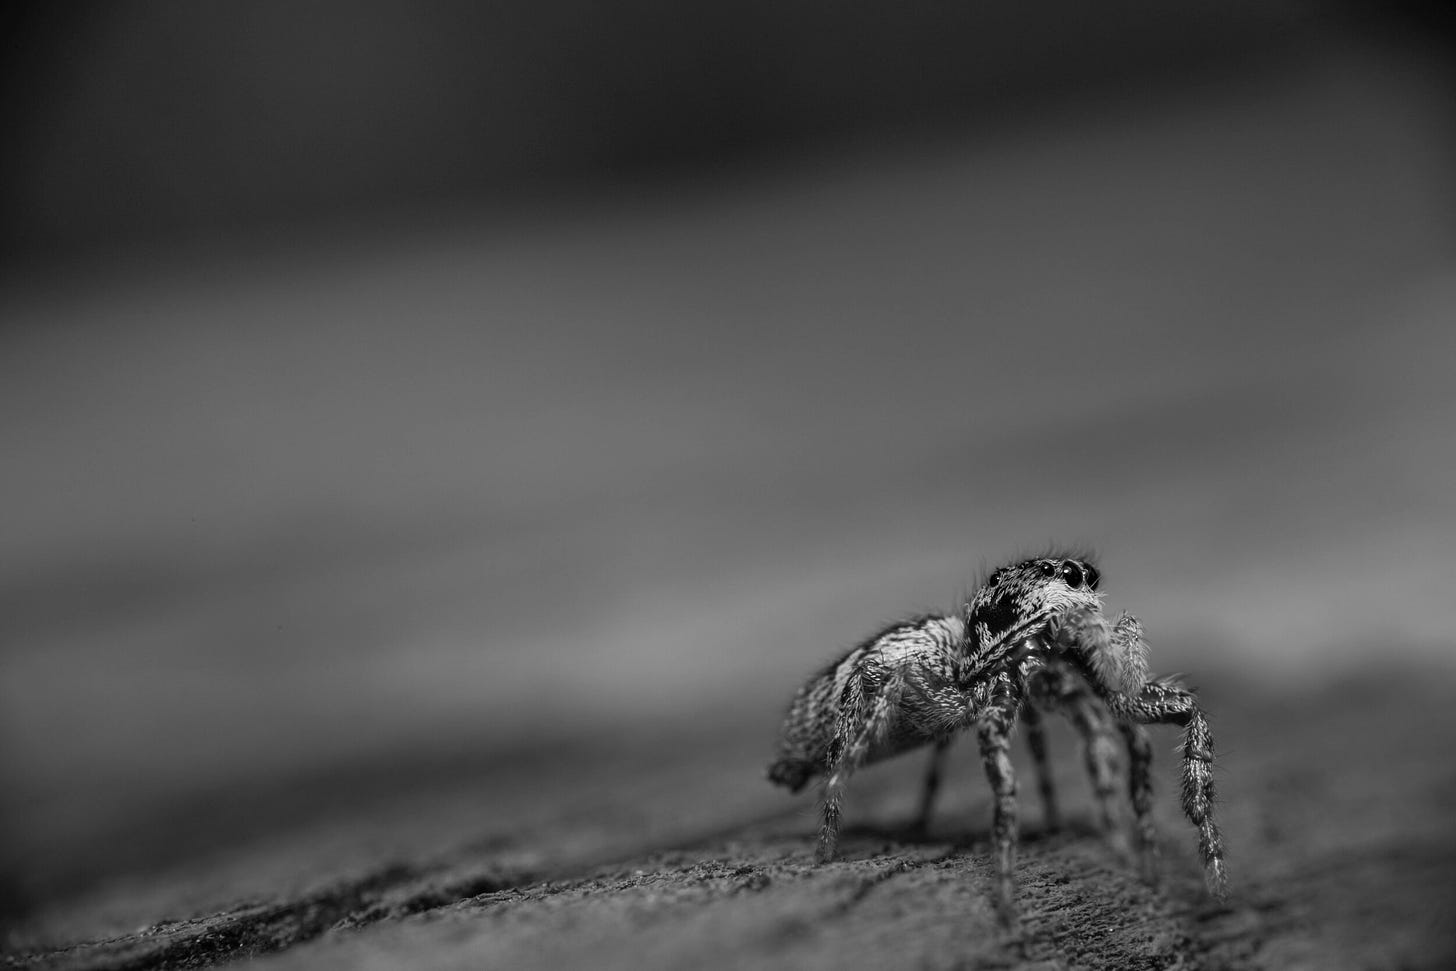 A Lonesome Zebra Jumping Spider&nbsp;